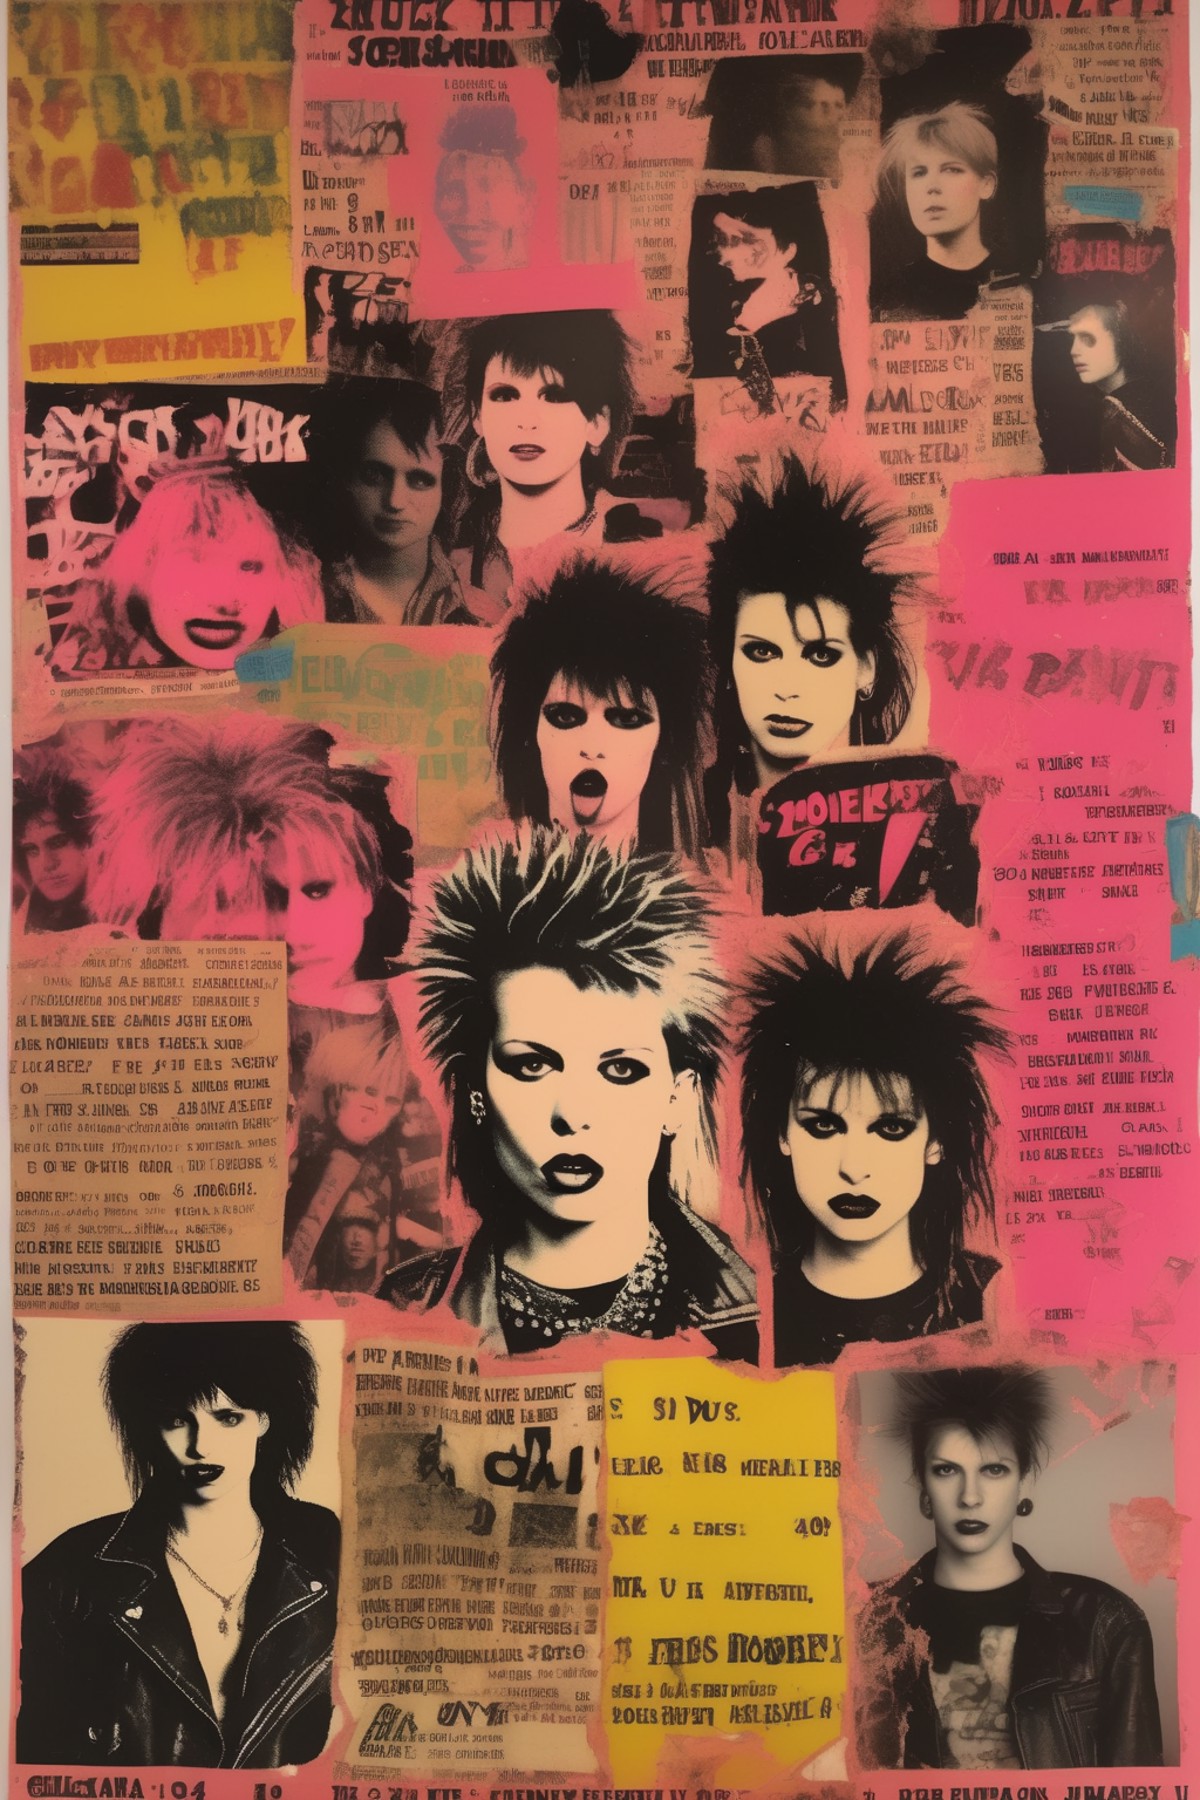 <lora:Punk Collage:1>Punk Collage - punk rock in the 80s poster from gilman street in berkeley